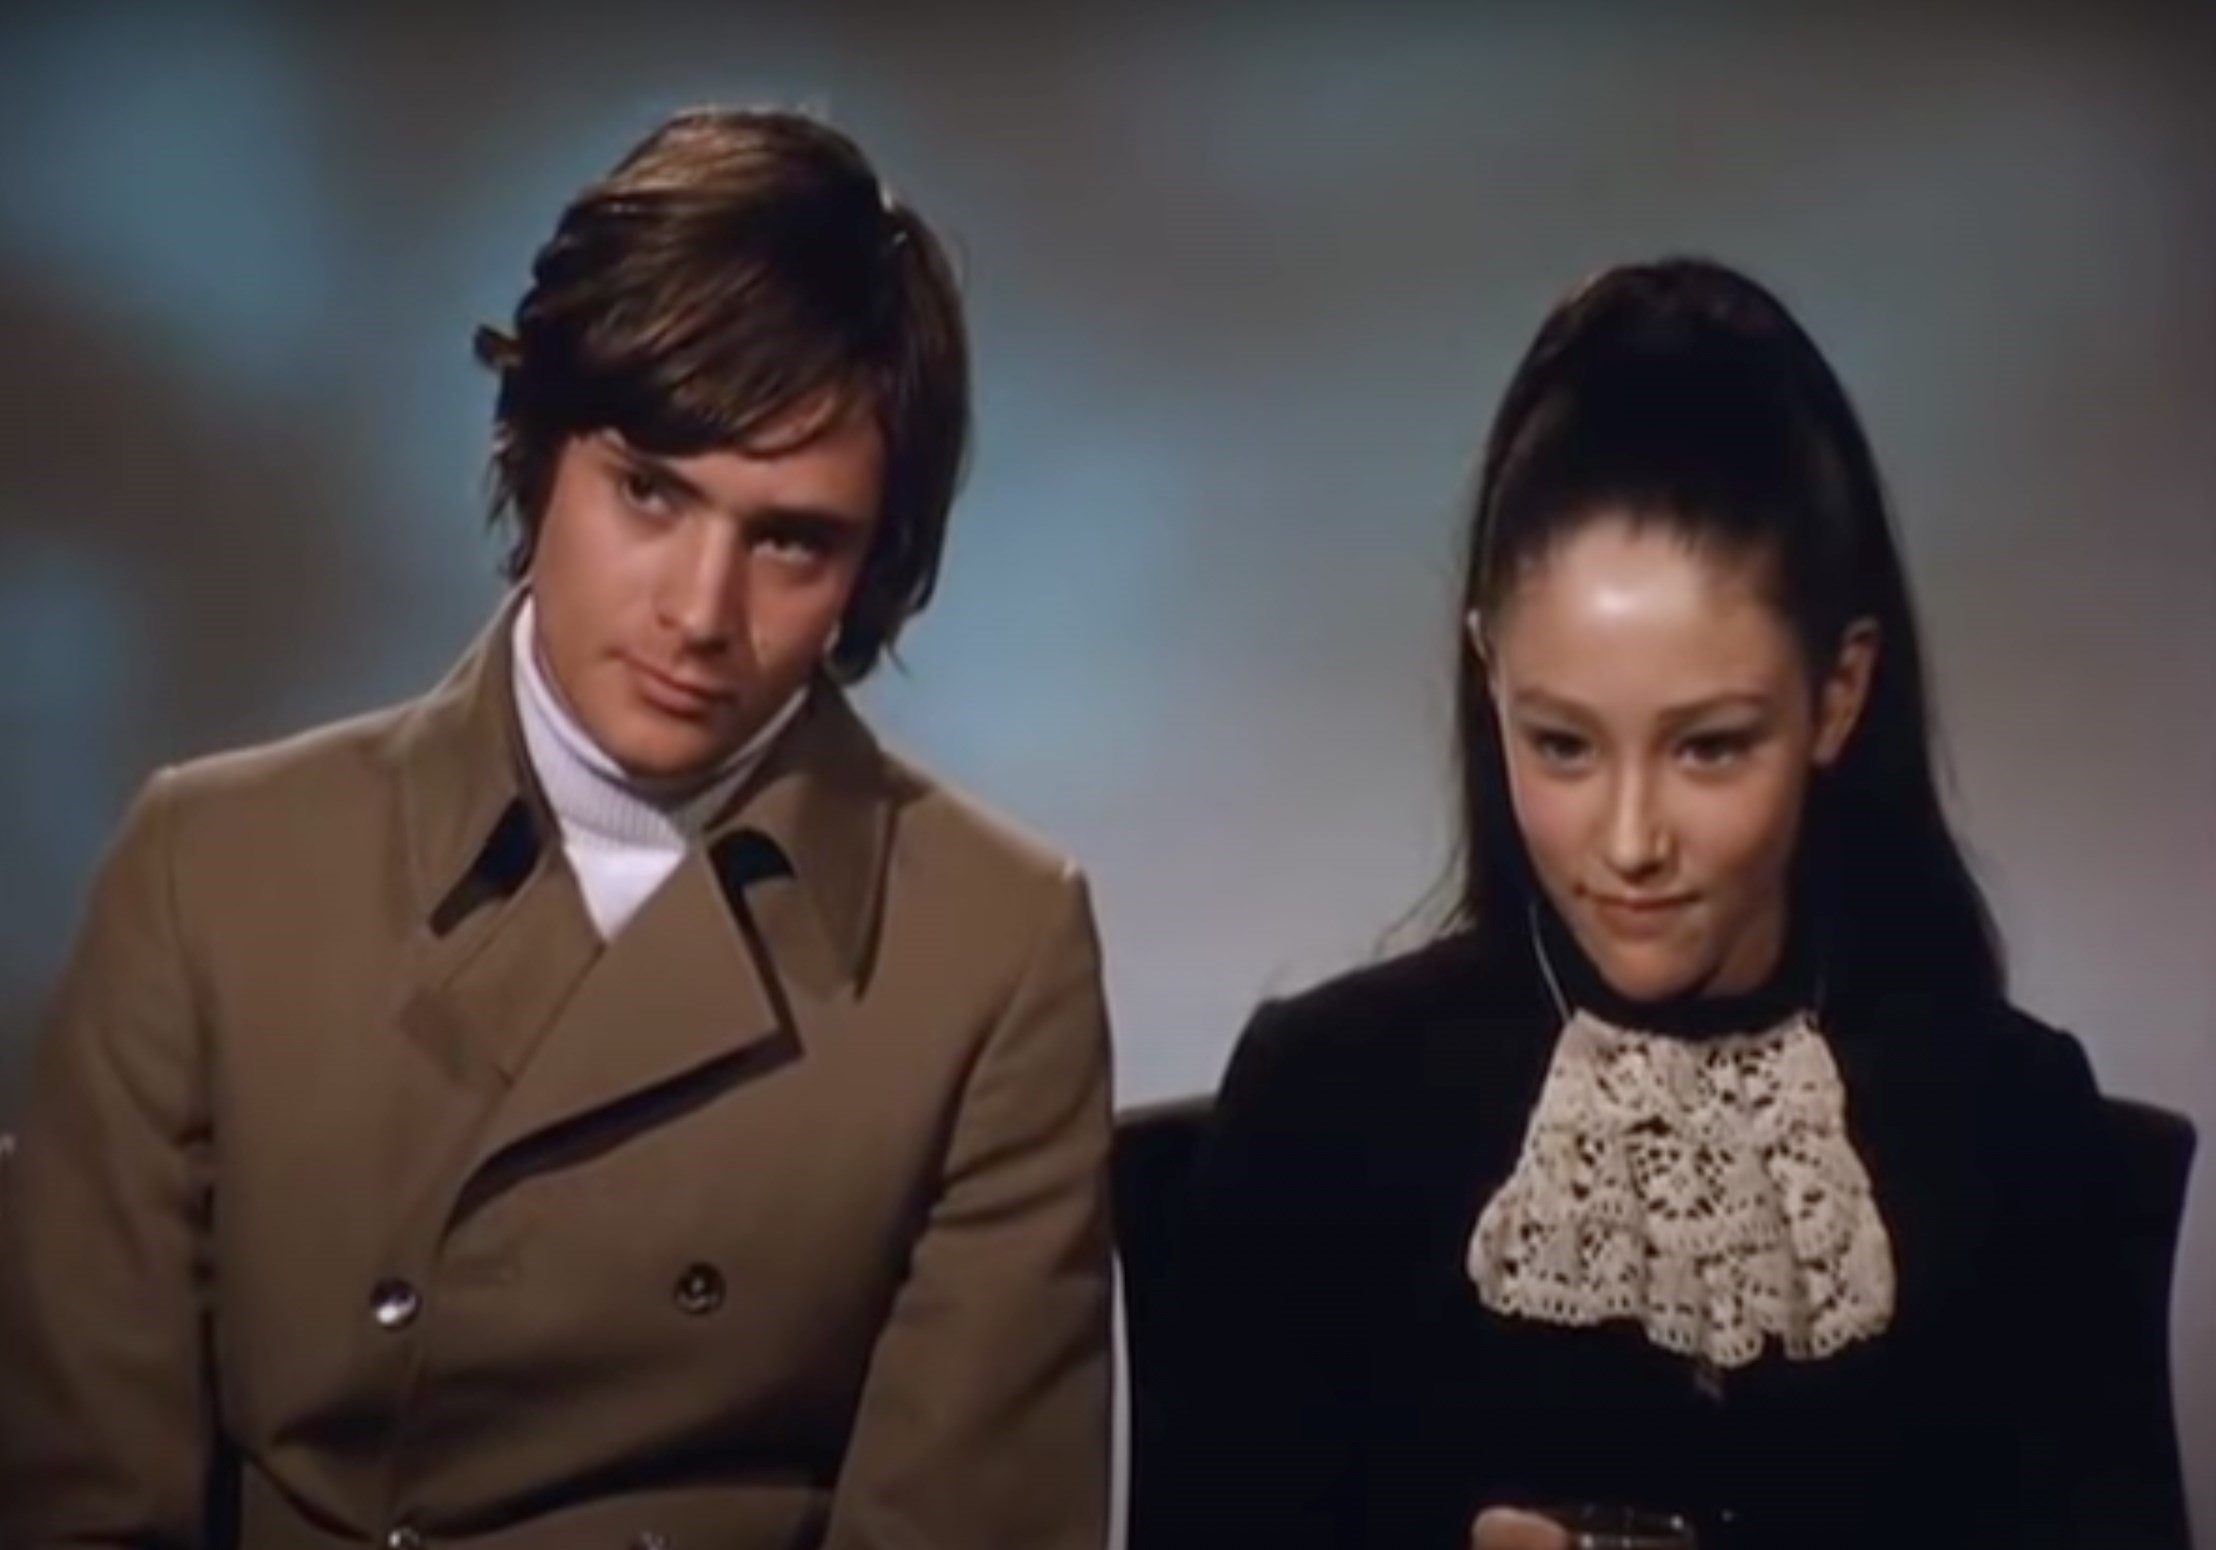 caleb bovard recommends Olivia Hussey Romeo And Juliet Topless